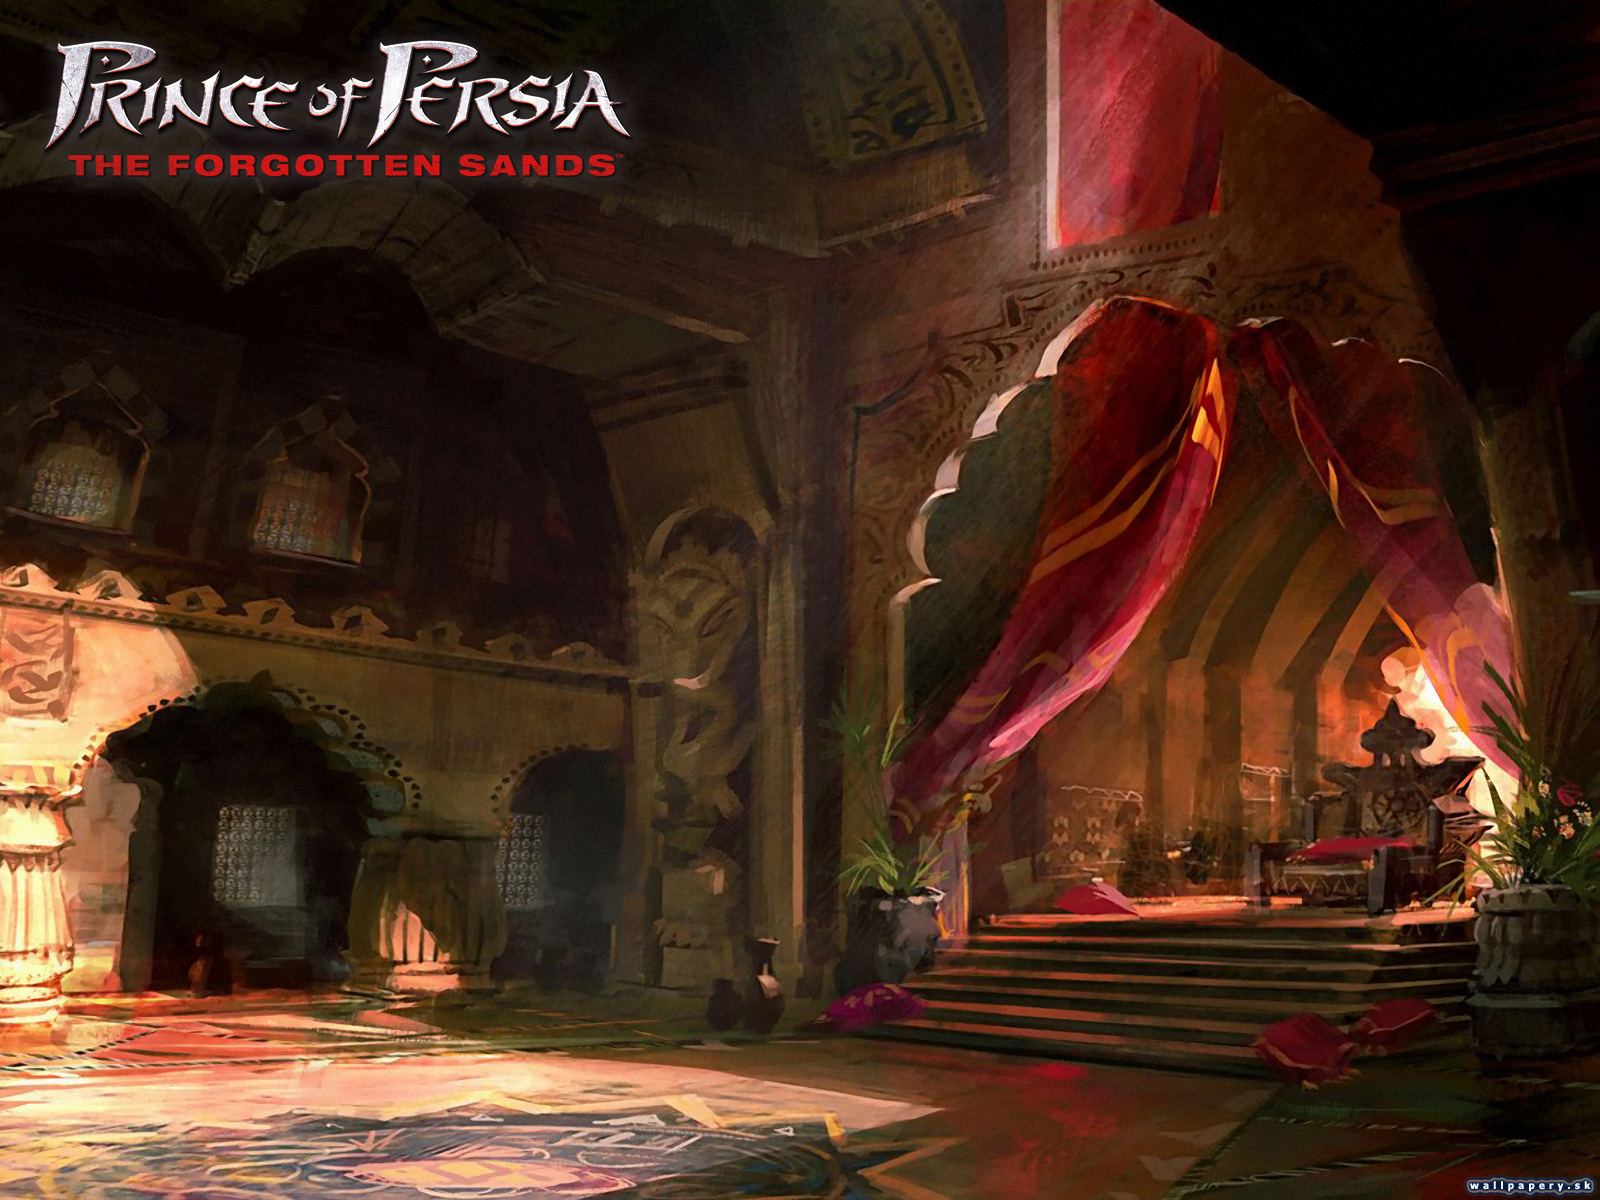 Prince of Persia: The Forgotten Sands - wallpaper 8